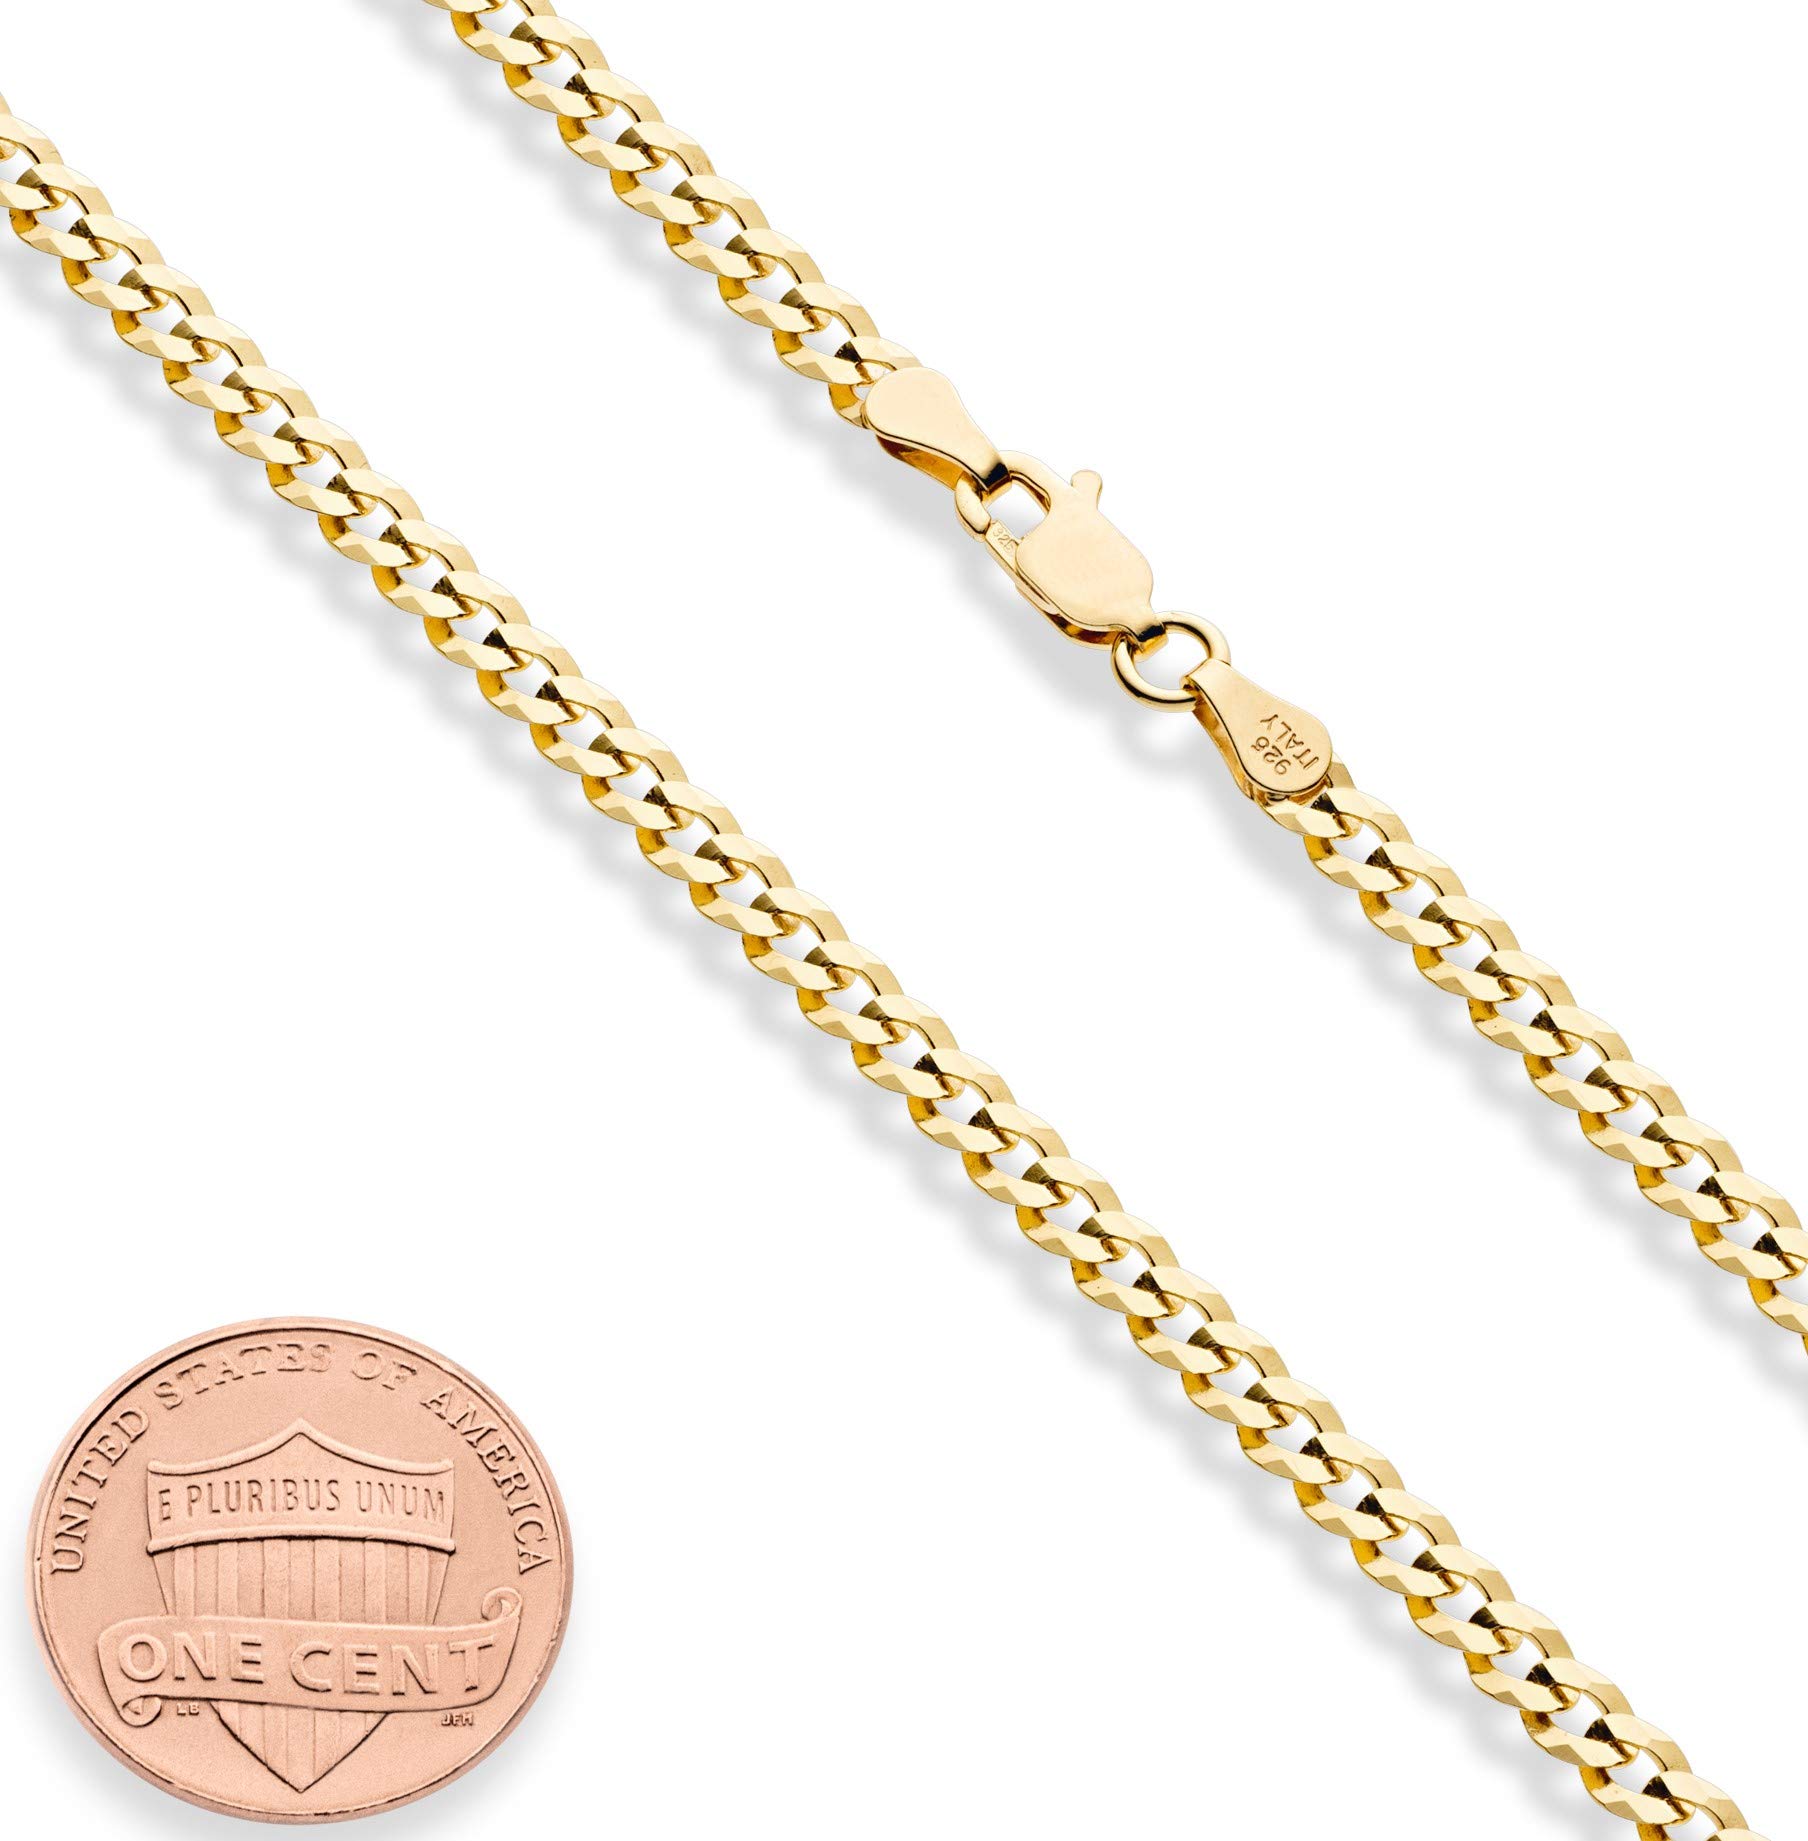 Miabella Solid 18k Gold Over 925 Sterling Silver Italian 3.5mm Diamond Cut Cuban Link Curb Chain Necklace for Women Men, Made in Italy